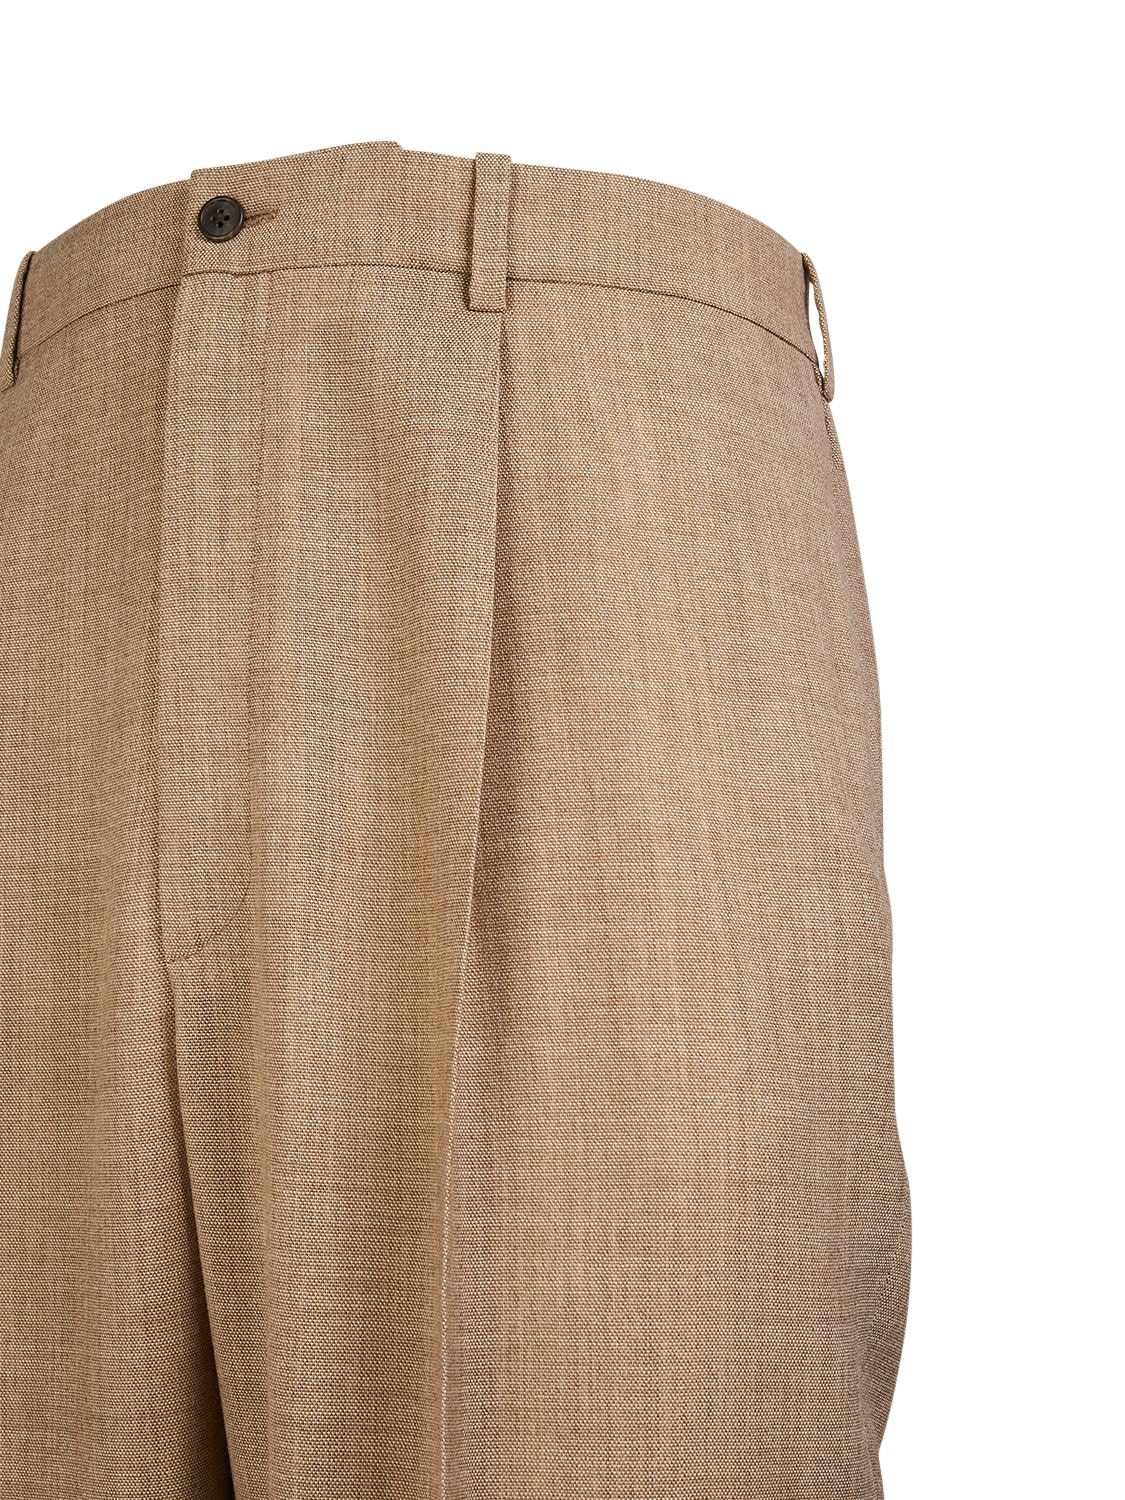 Shop The Row Keenan Wool Pants In Taupe,ivory M